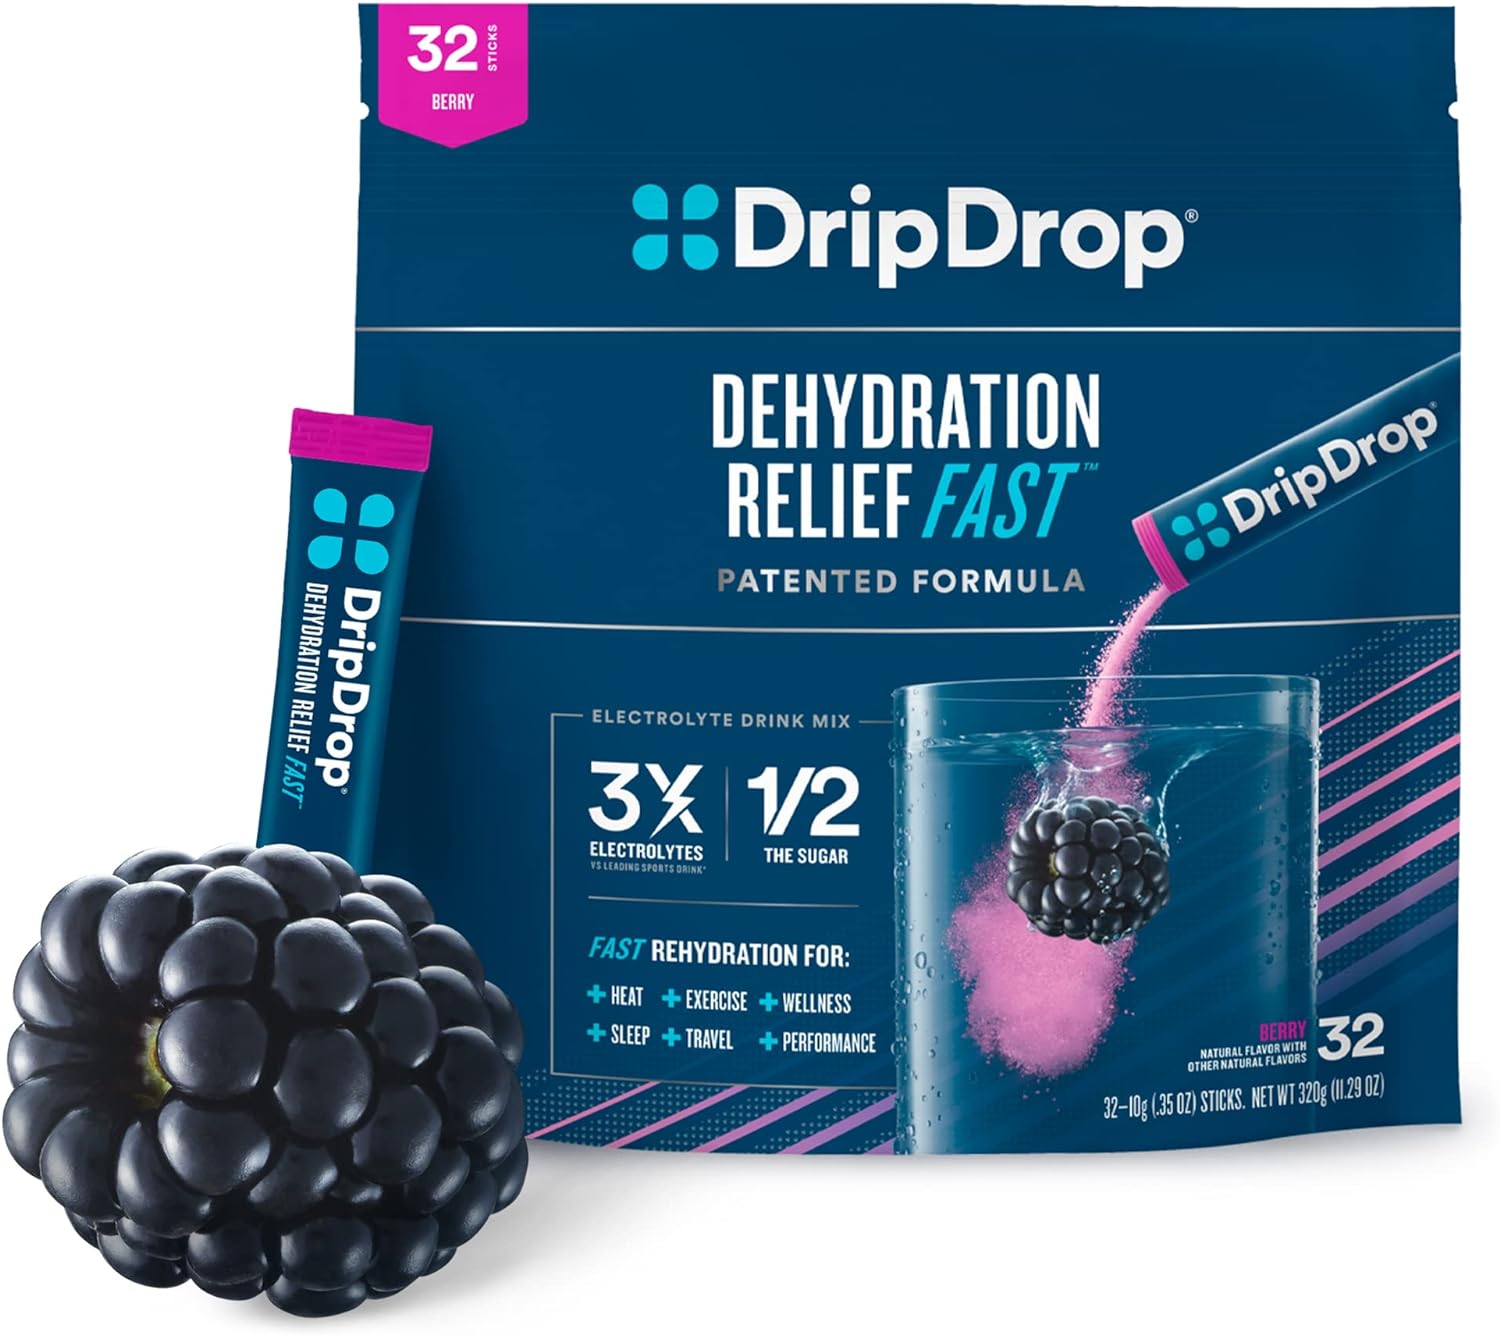 DripDrop Hydration - Electrolyte Powder Packets - Berry - 32 Count32 S